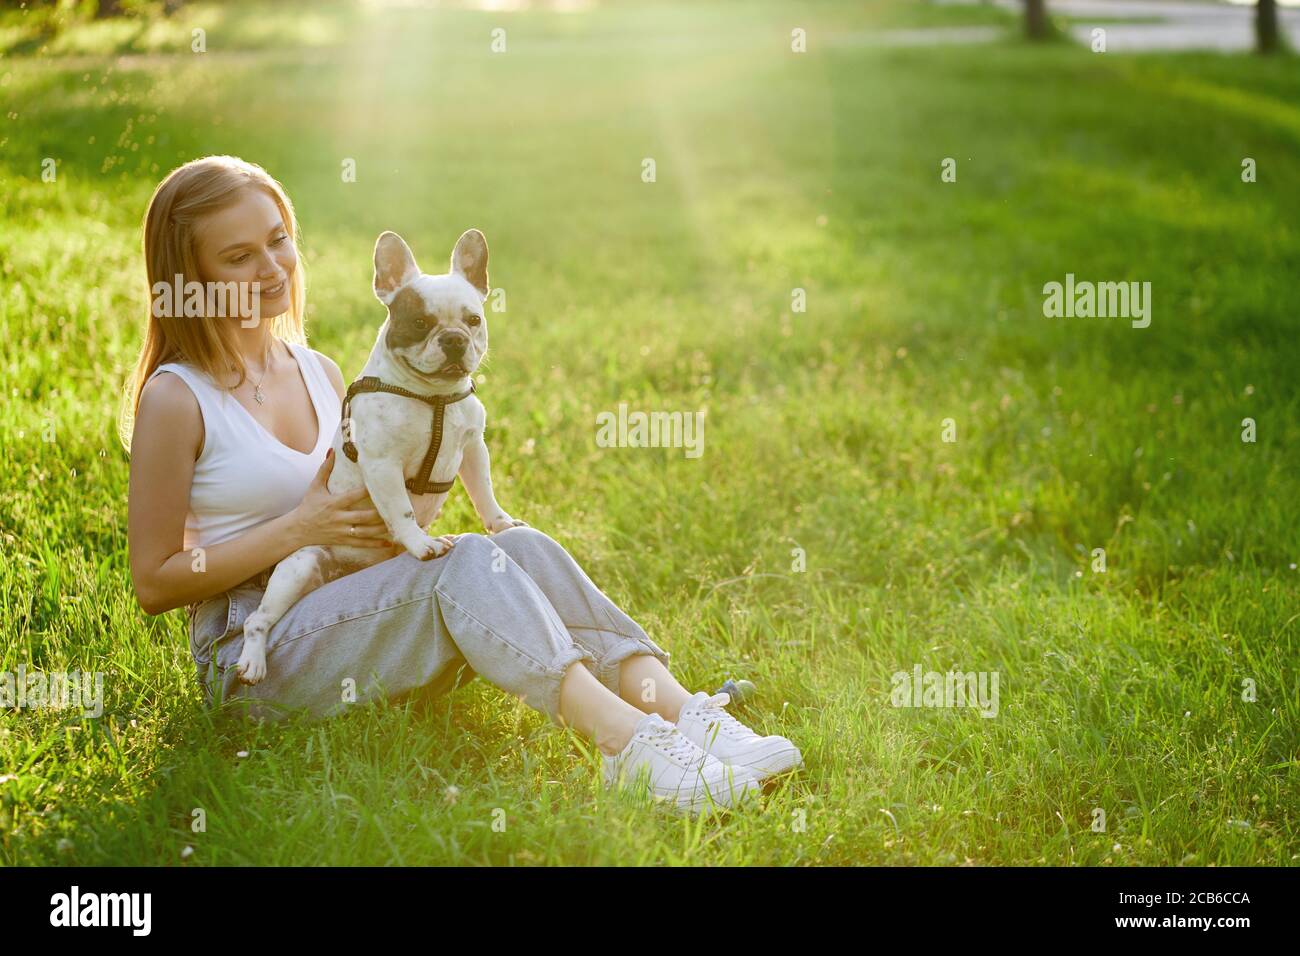 Top view of young happy woman sitting on grass with lovely french bulldog. Gorgeous caucasian smiling girl enjoying summer sunset, holding dog on knees in city park. Human and animal friendship. Stock Photo